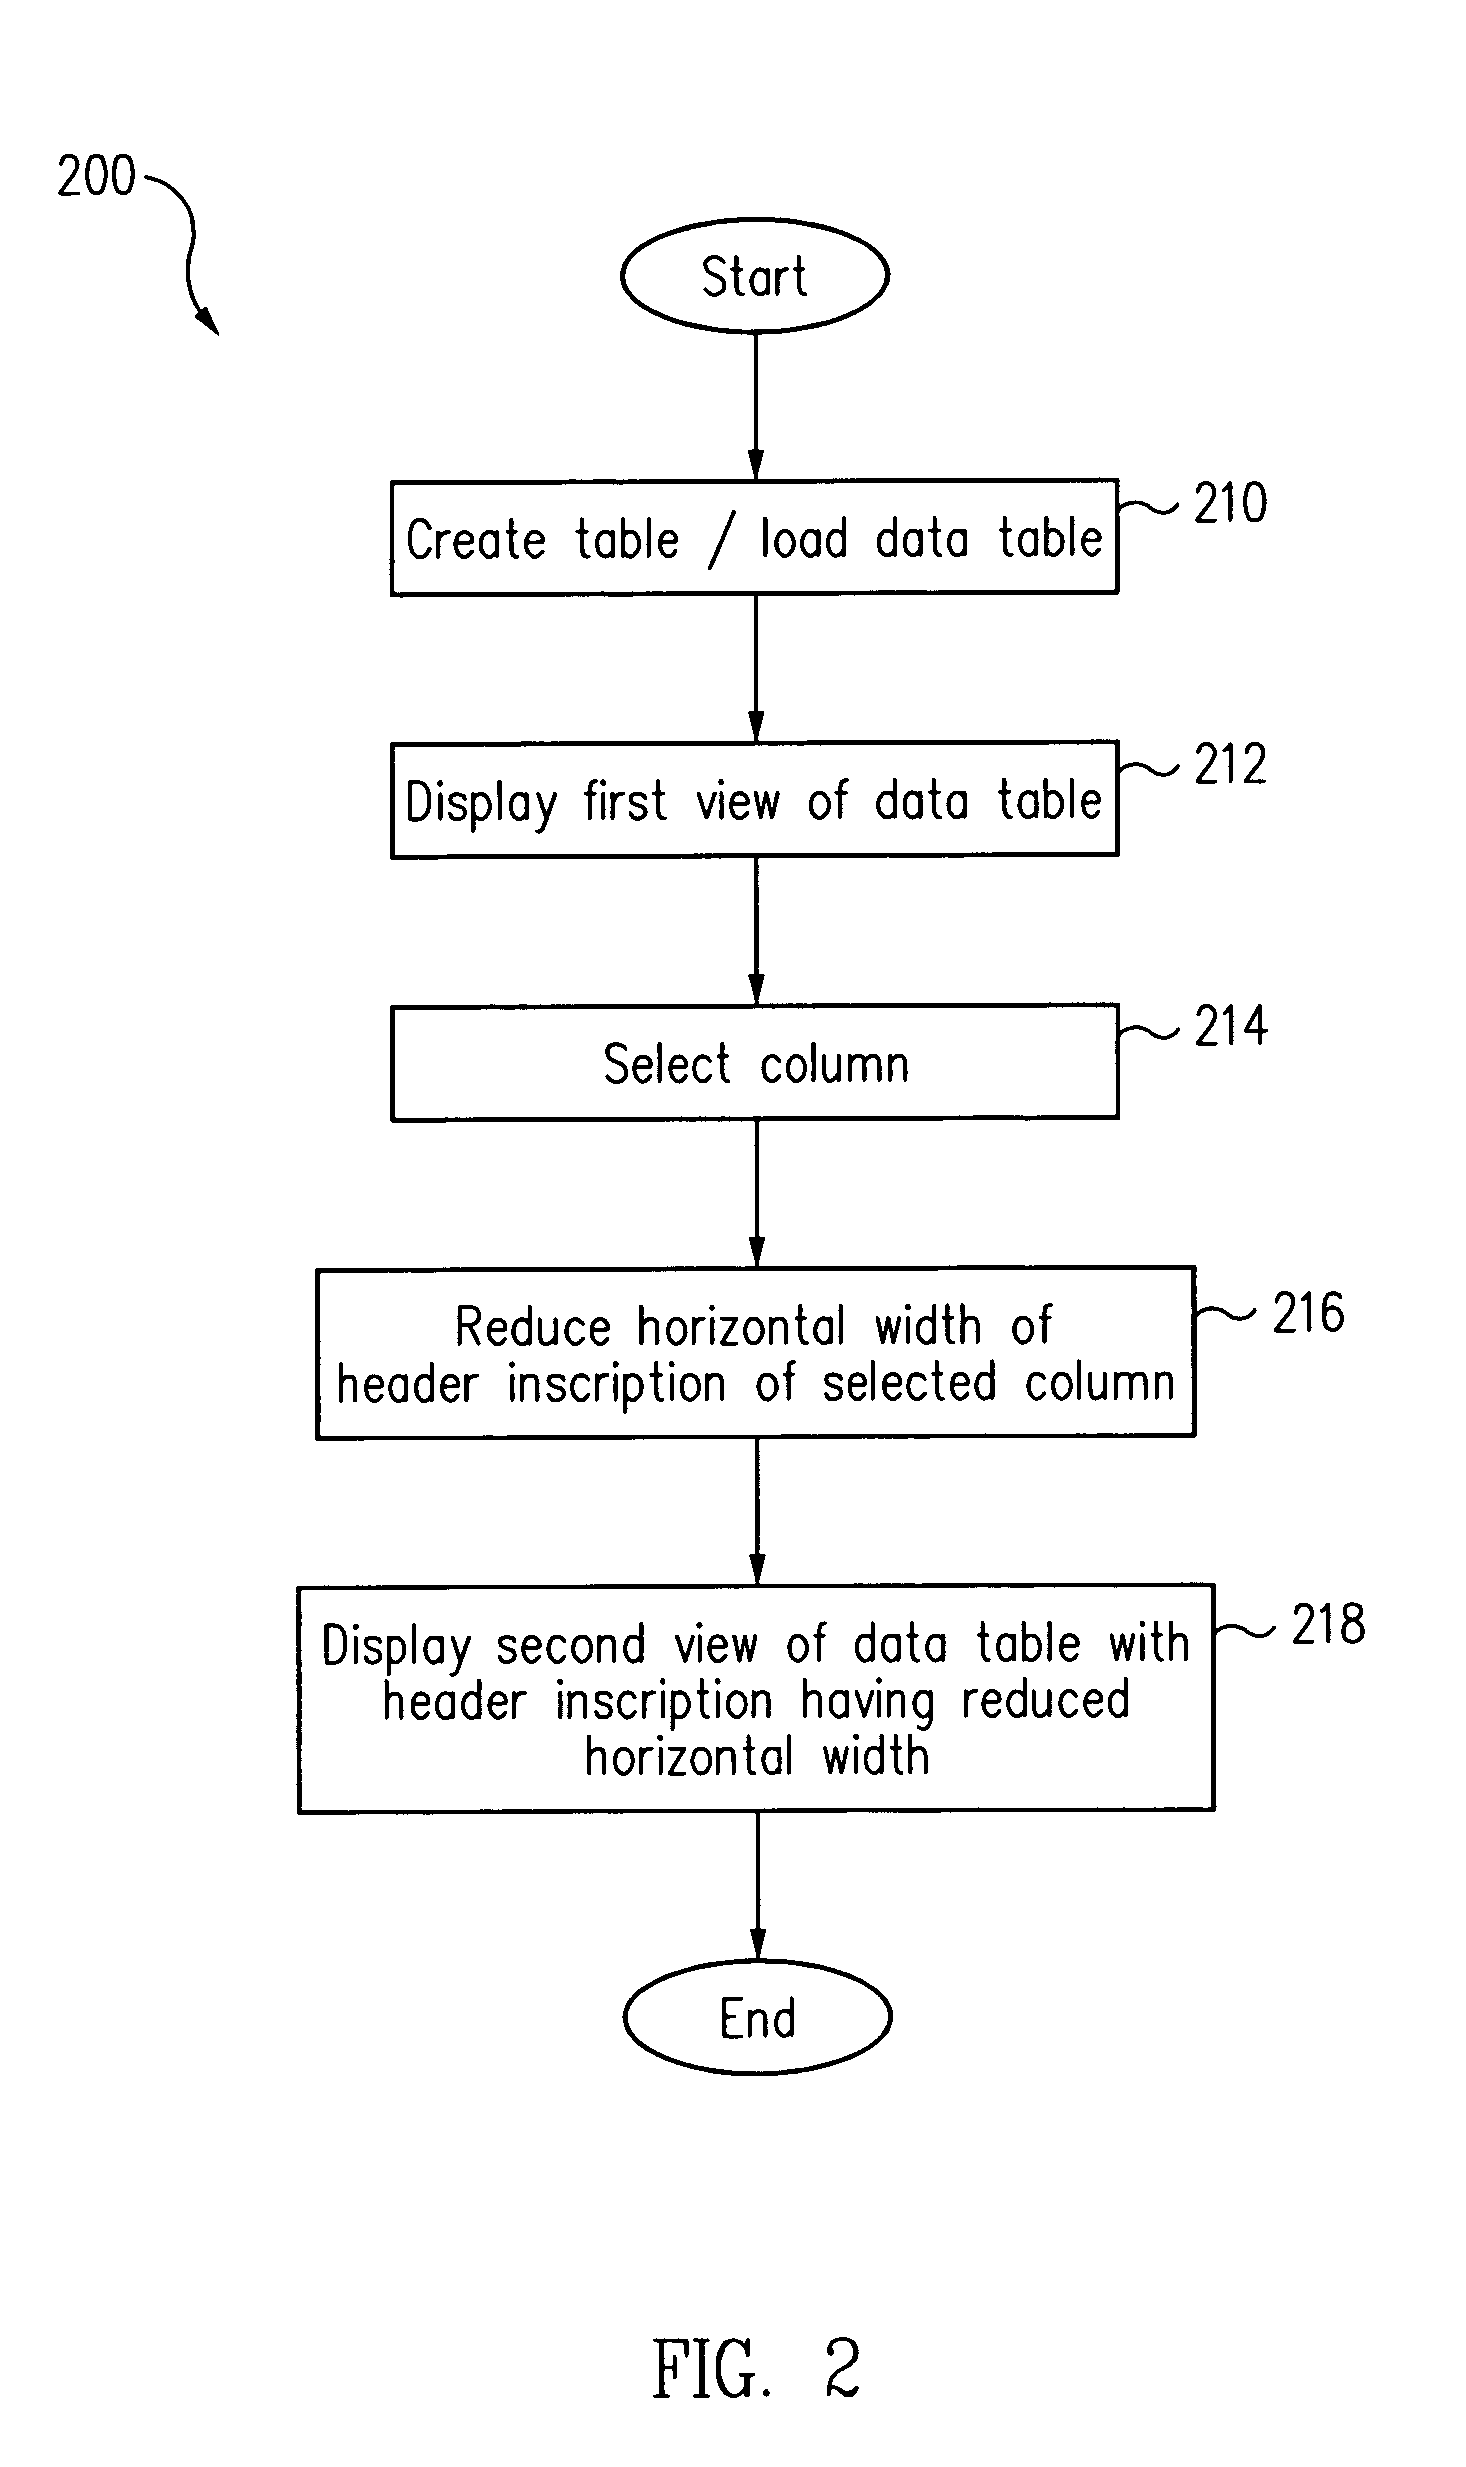 Method and computer system for displaying a table with column header inscriptions having a reduced horizontal size